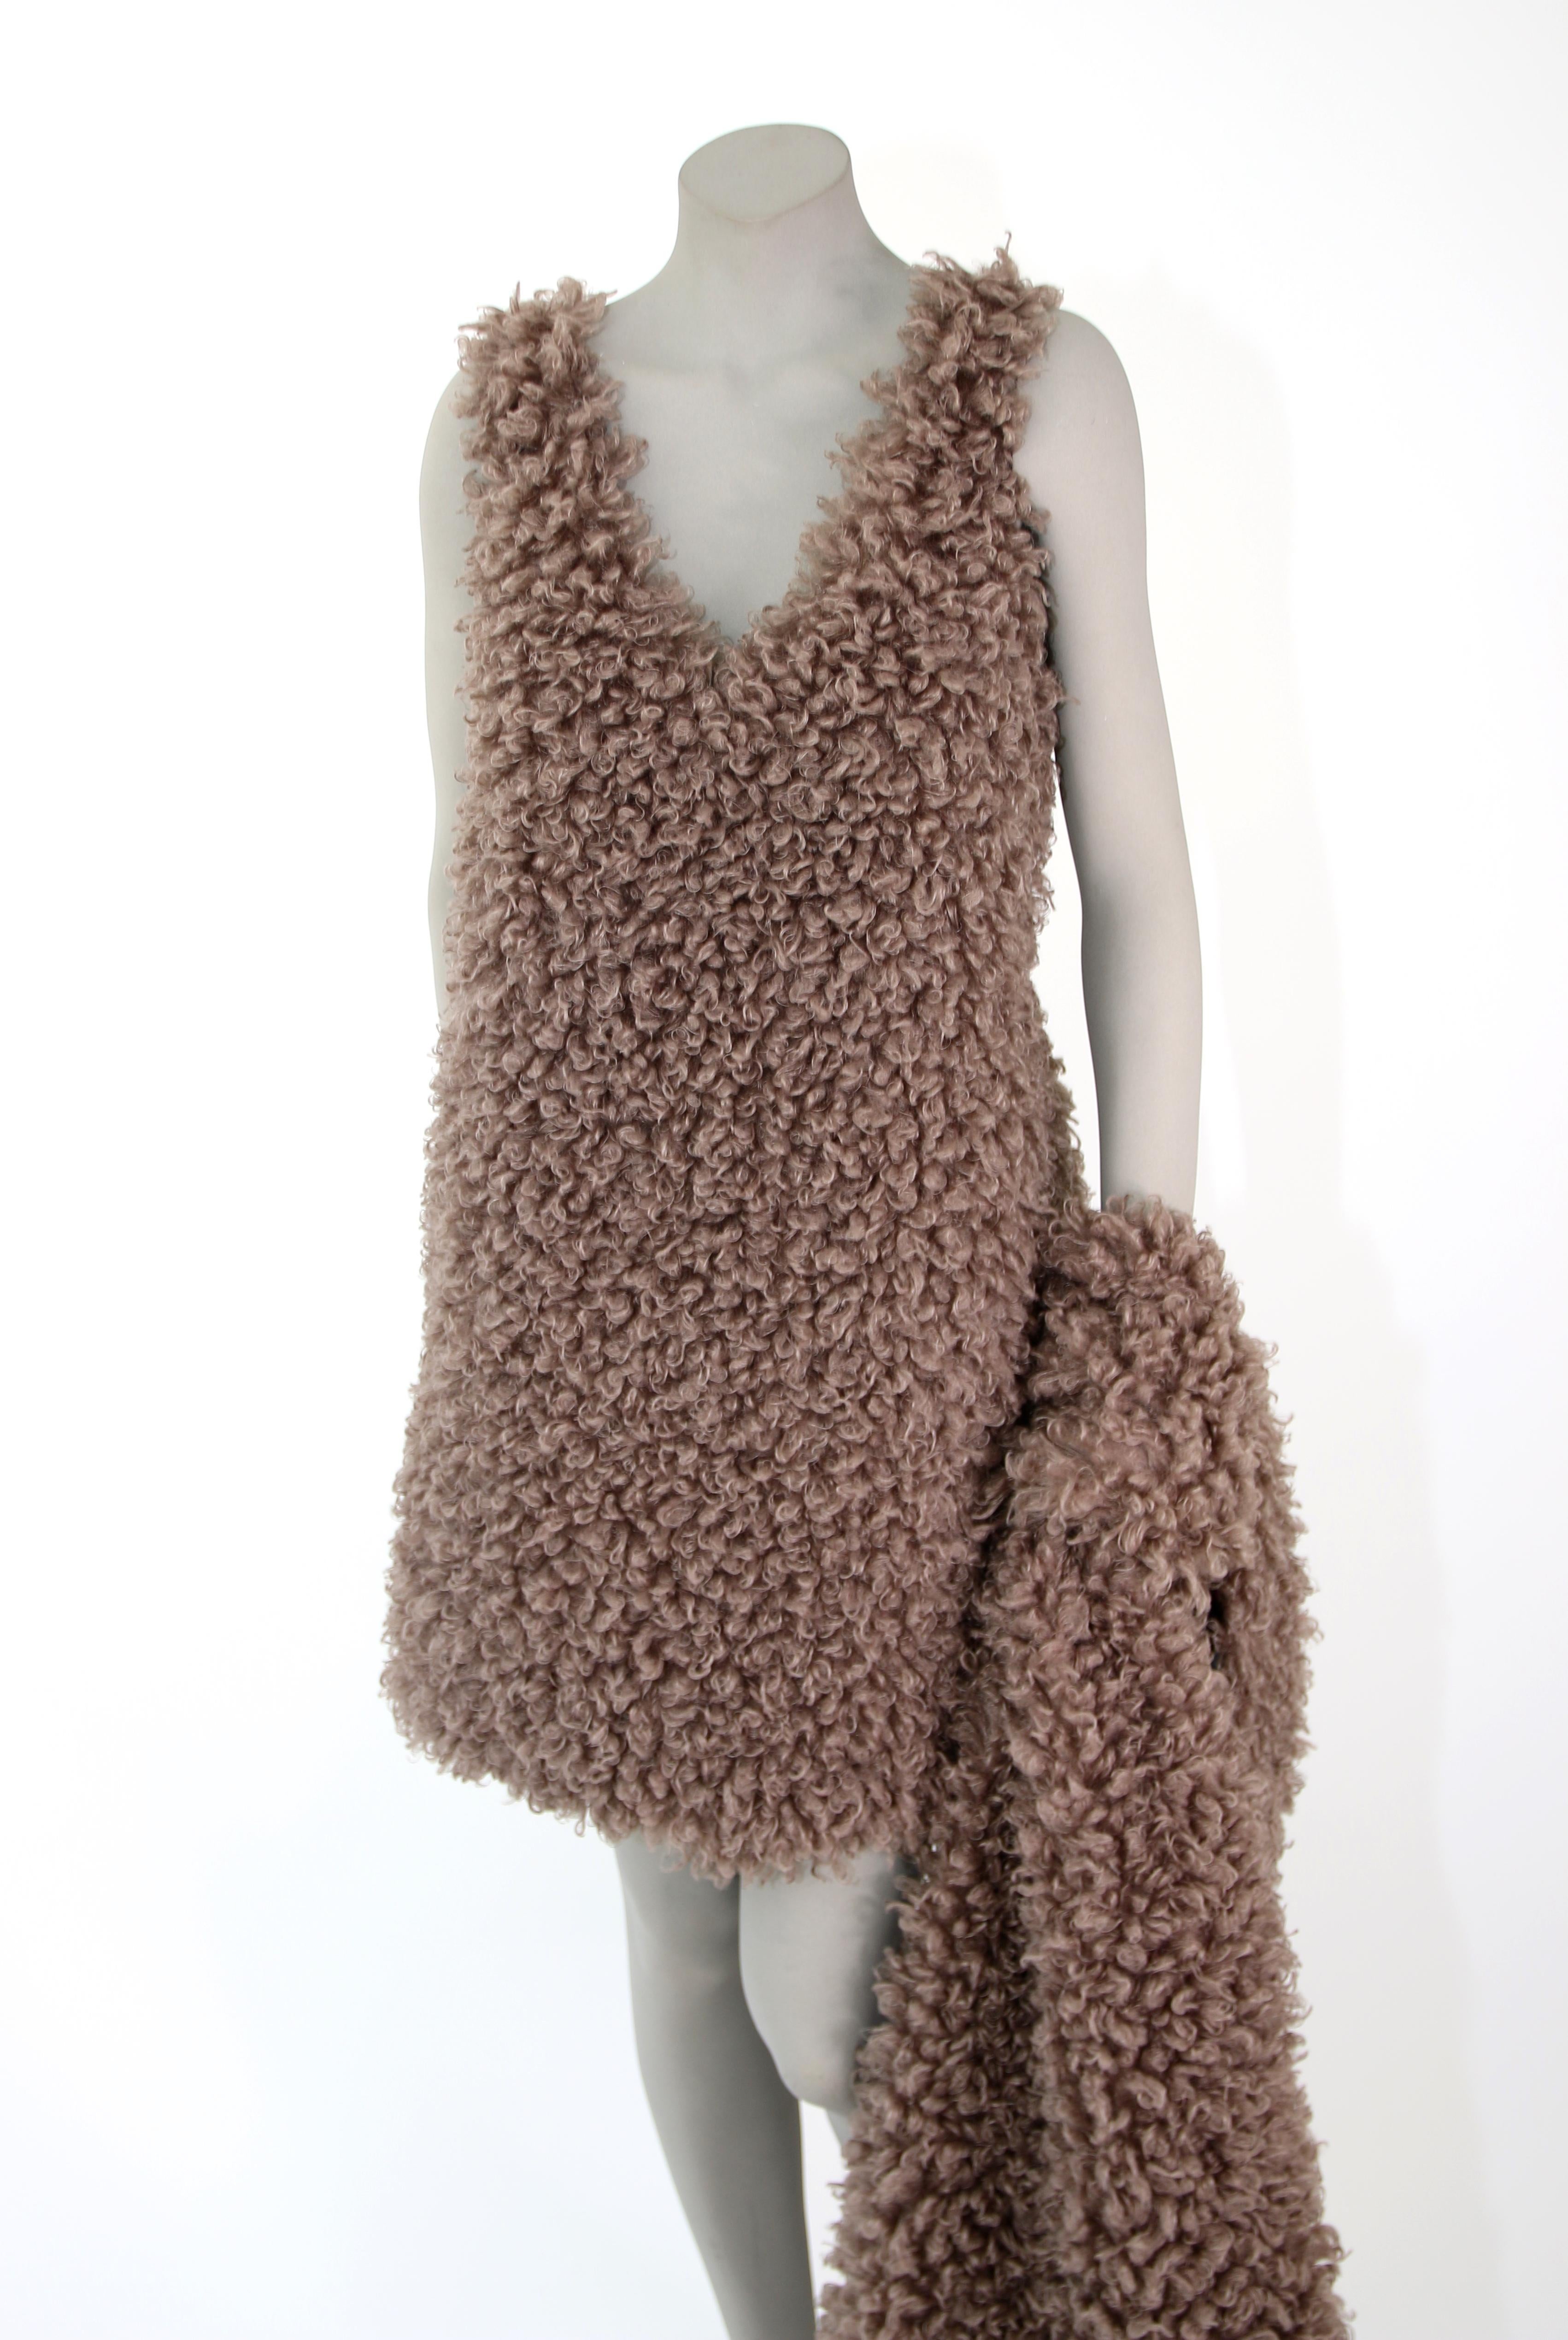 Pelush Faux Fur Mini Dress - Curly Boucle' Poodle Faux Fur Dress - Reversible -S In New Condition For Sale In Greenwich, CT